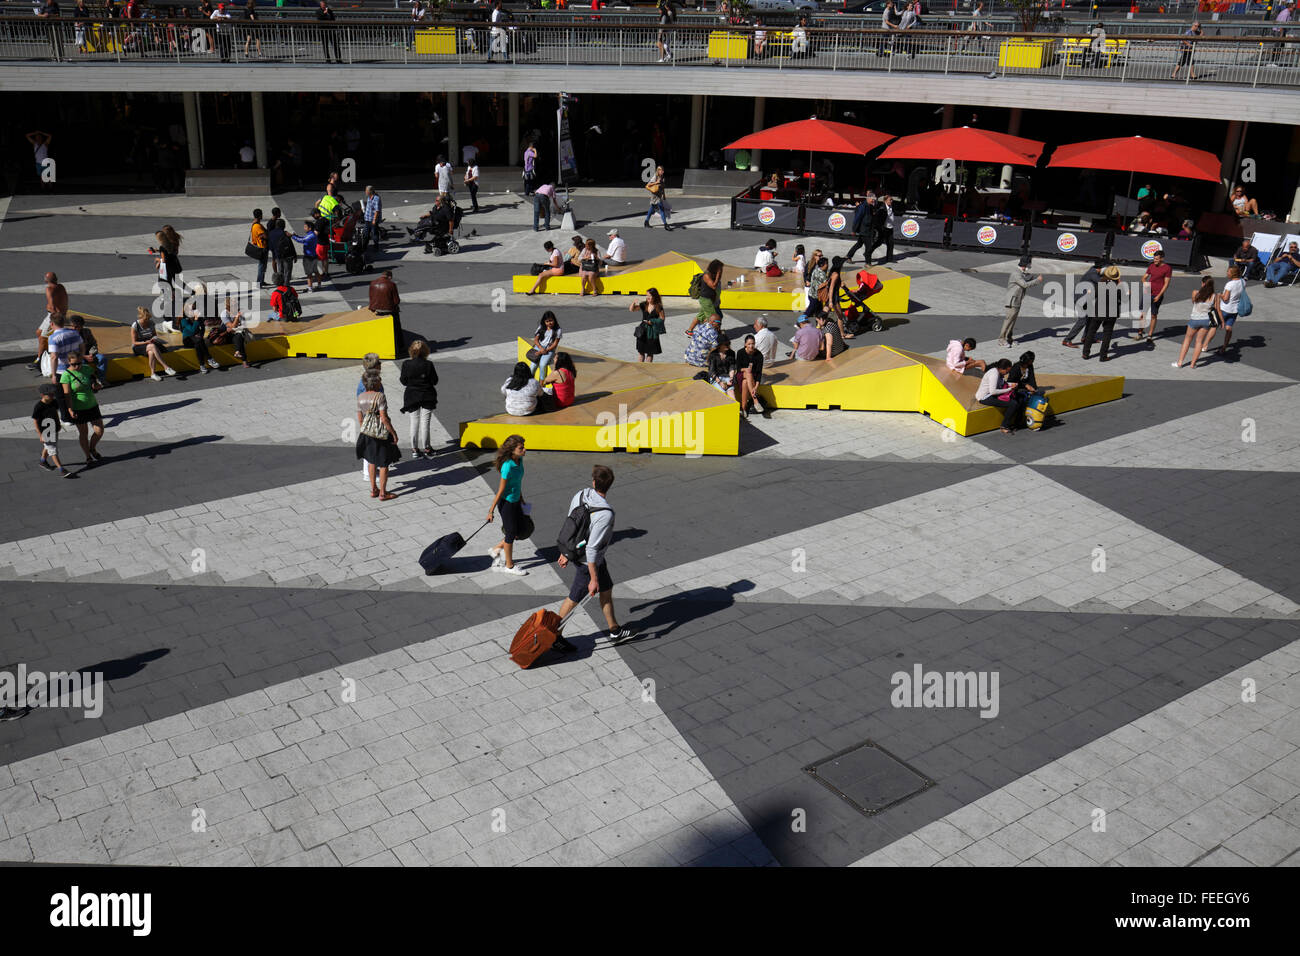 Sergels Torg square with its iconic triangular pattern plaza, Stockholm, Sweden Stock Photo